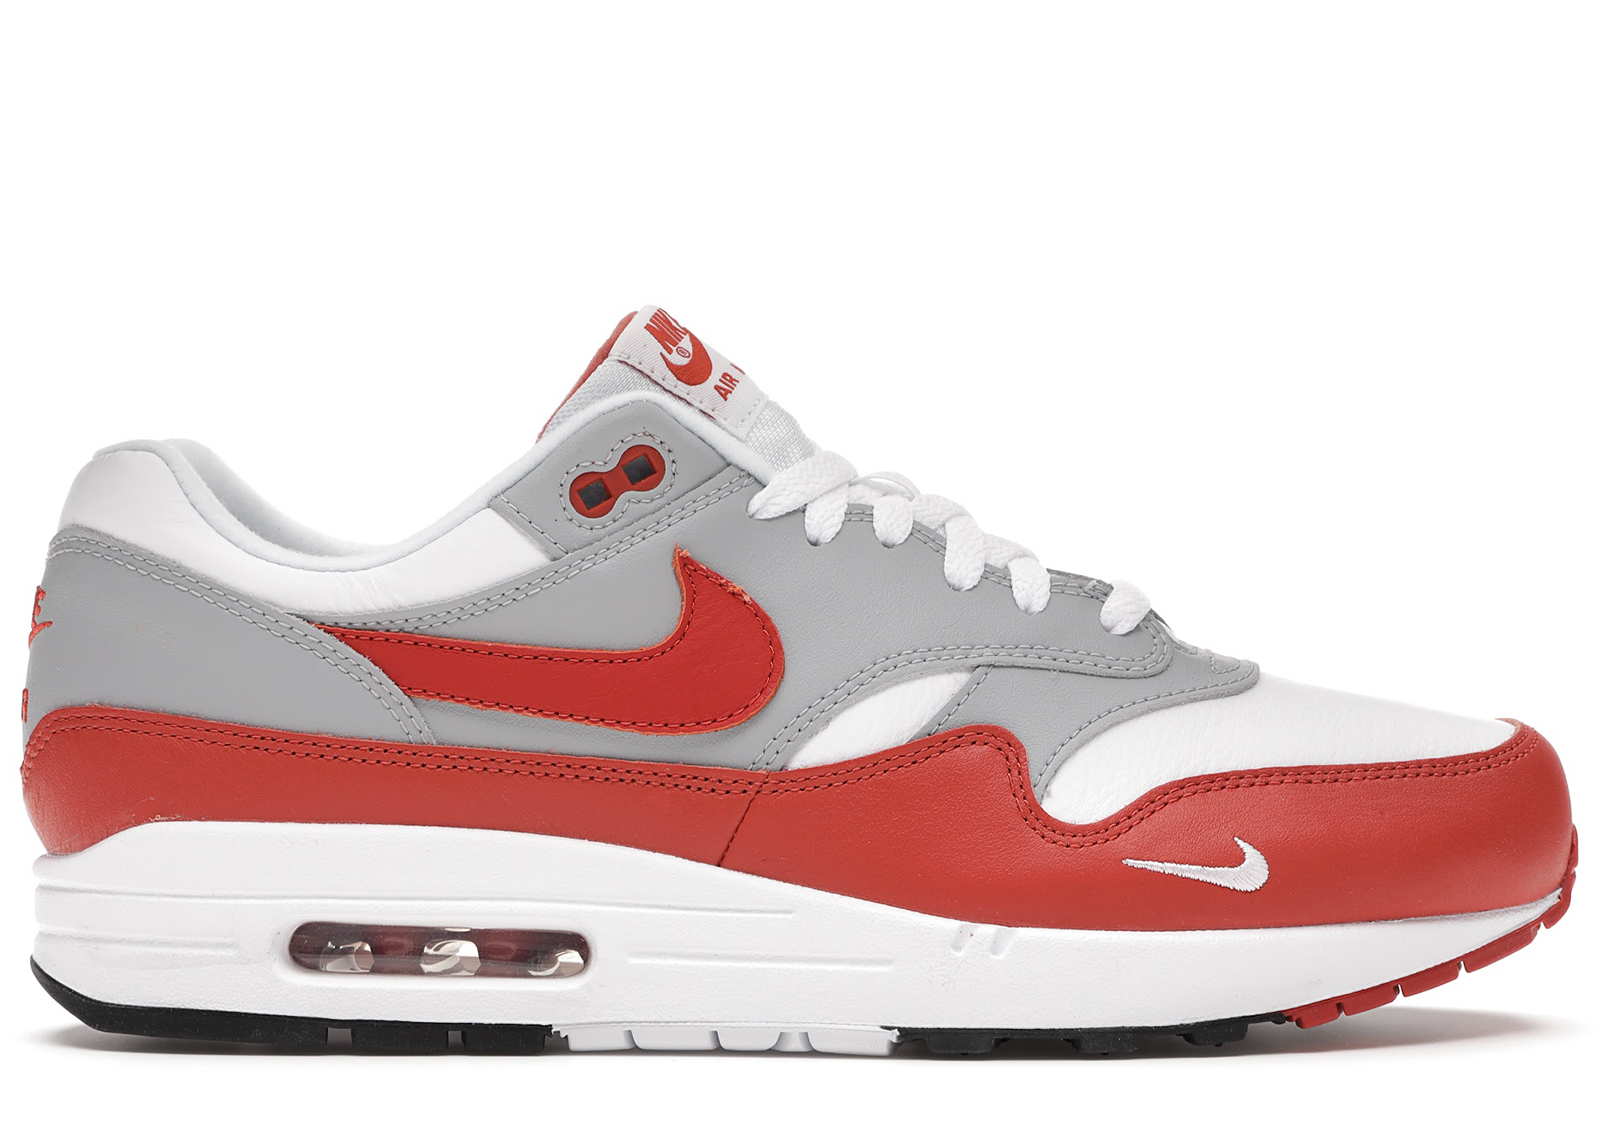 Buy Nike Air Max 1 Shoes & New Sneakers - StockX